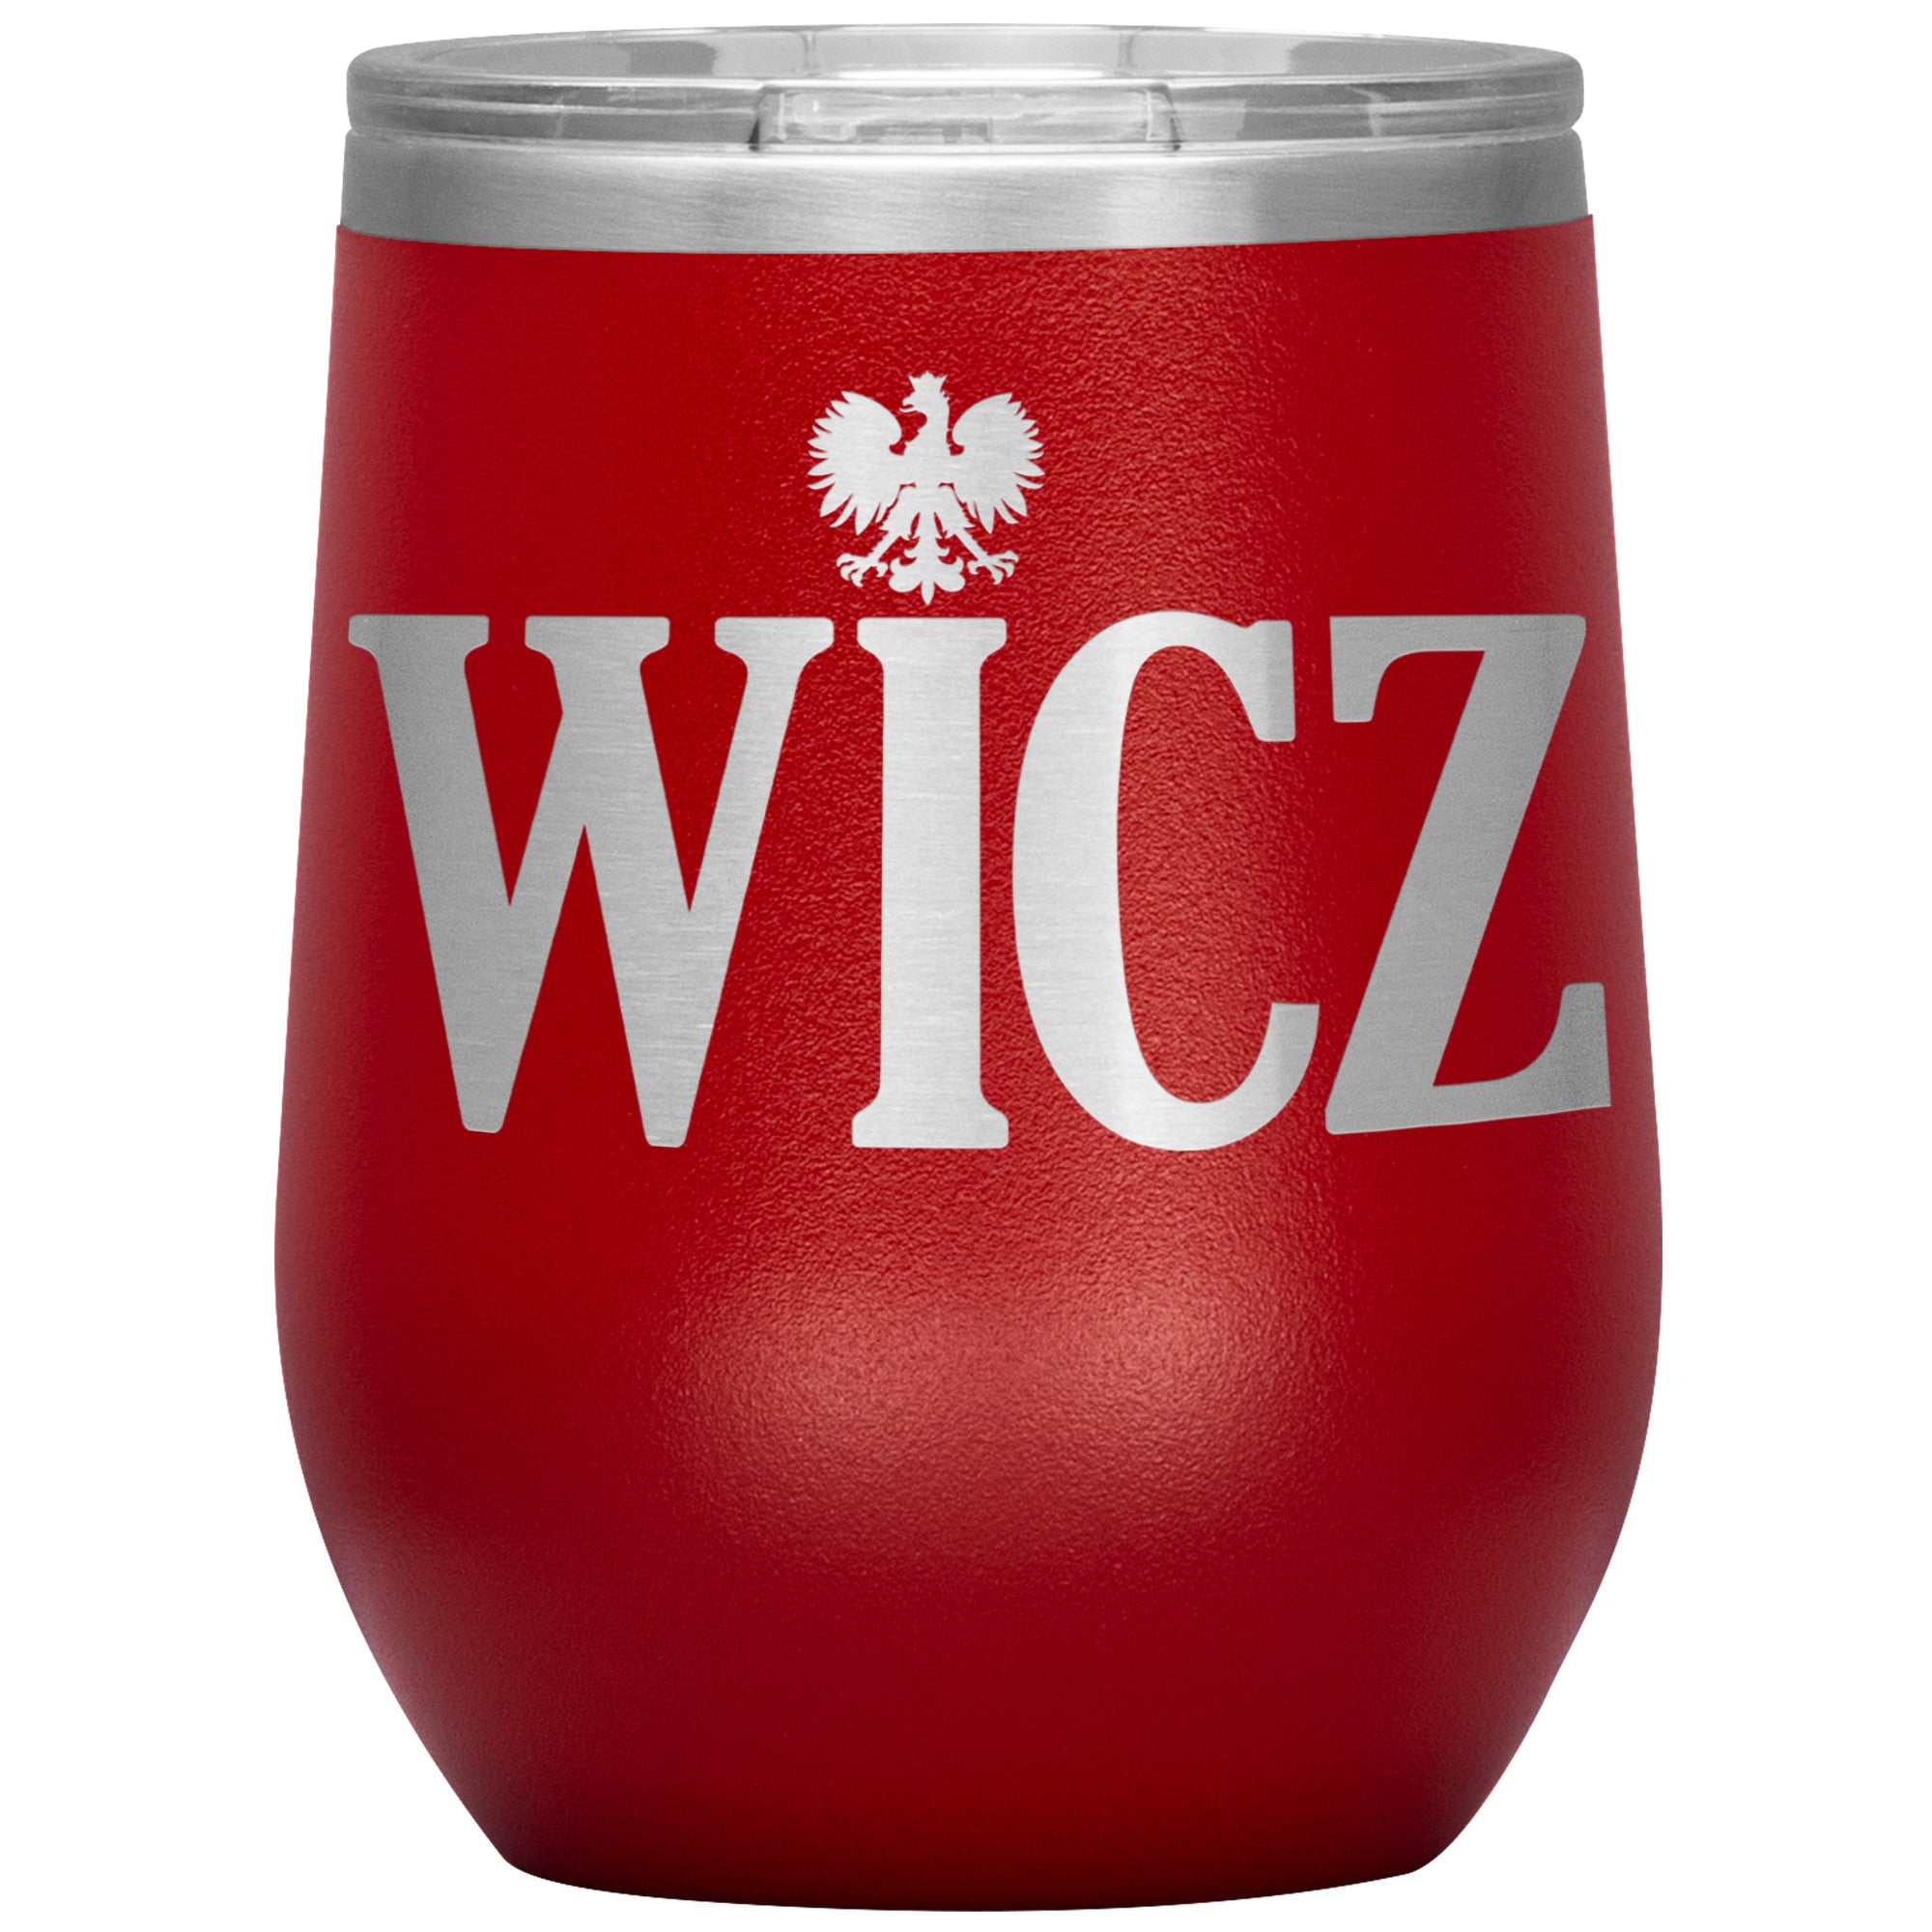 Polish Surname Ending in WICZ Insulated Wine Tumbler Tumblers teelaunch Red  